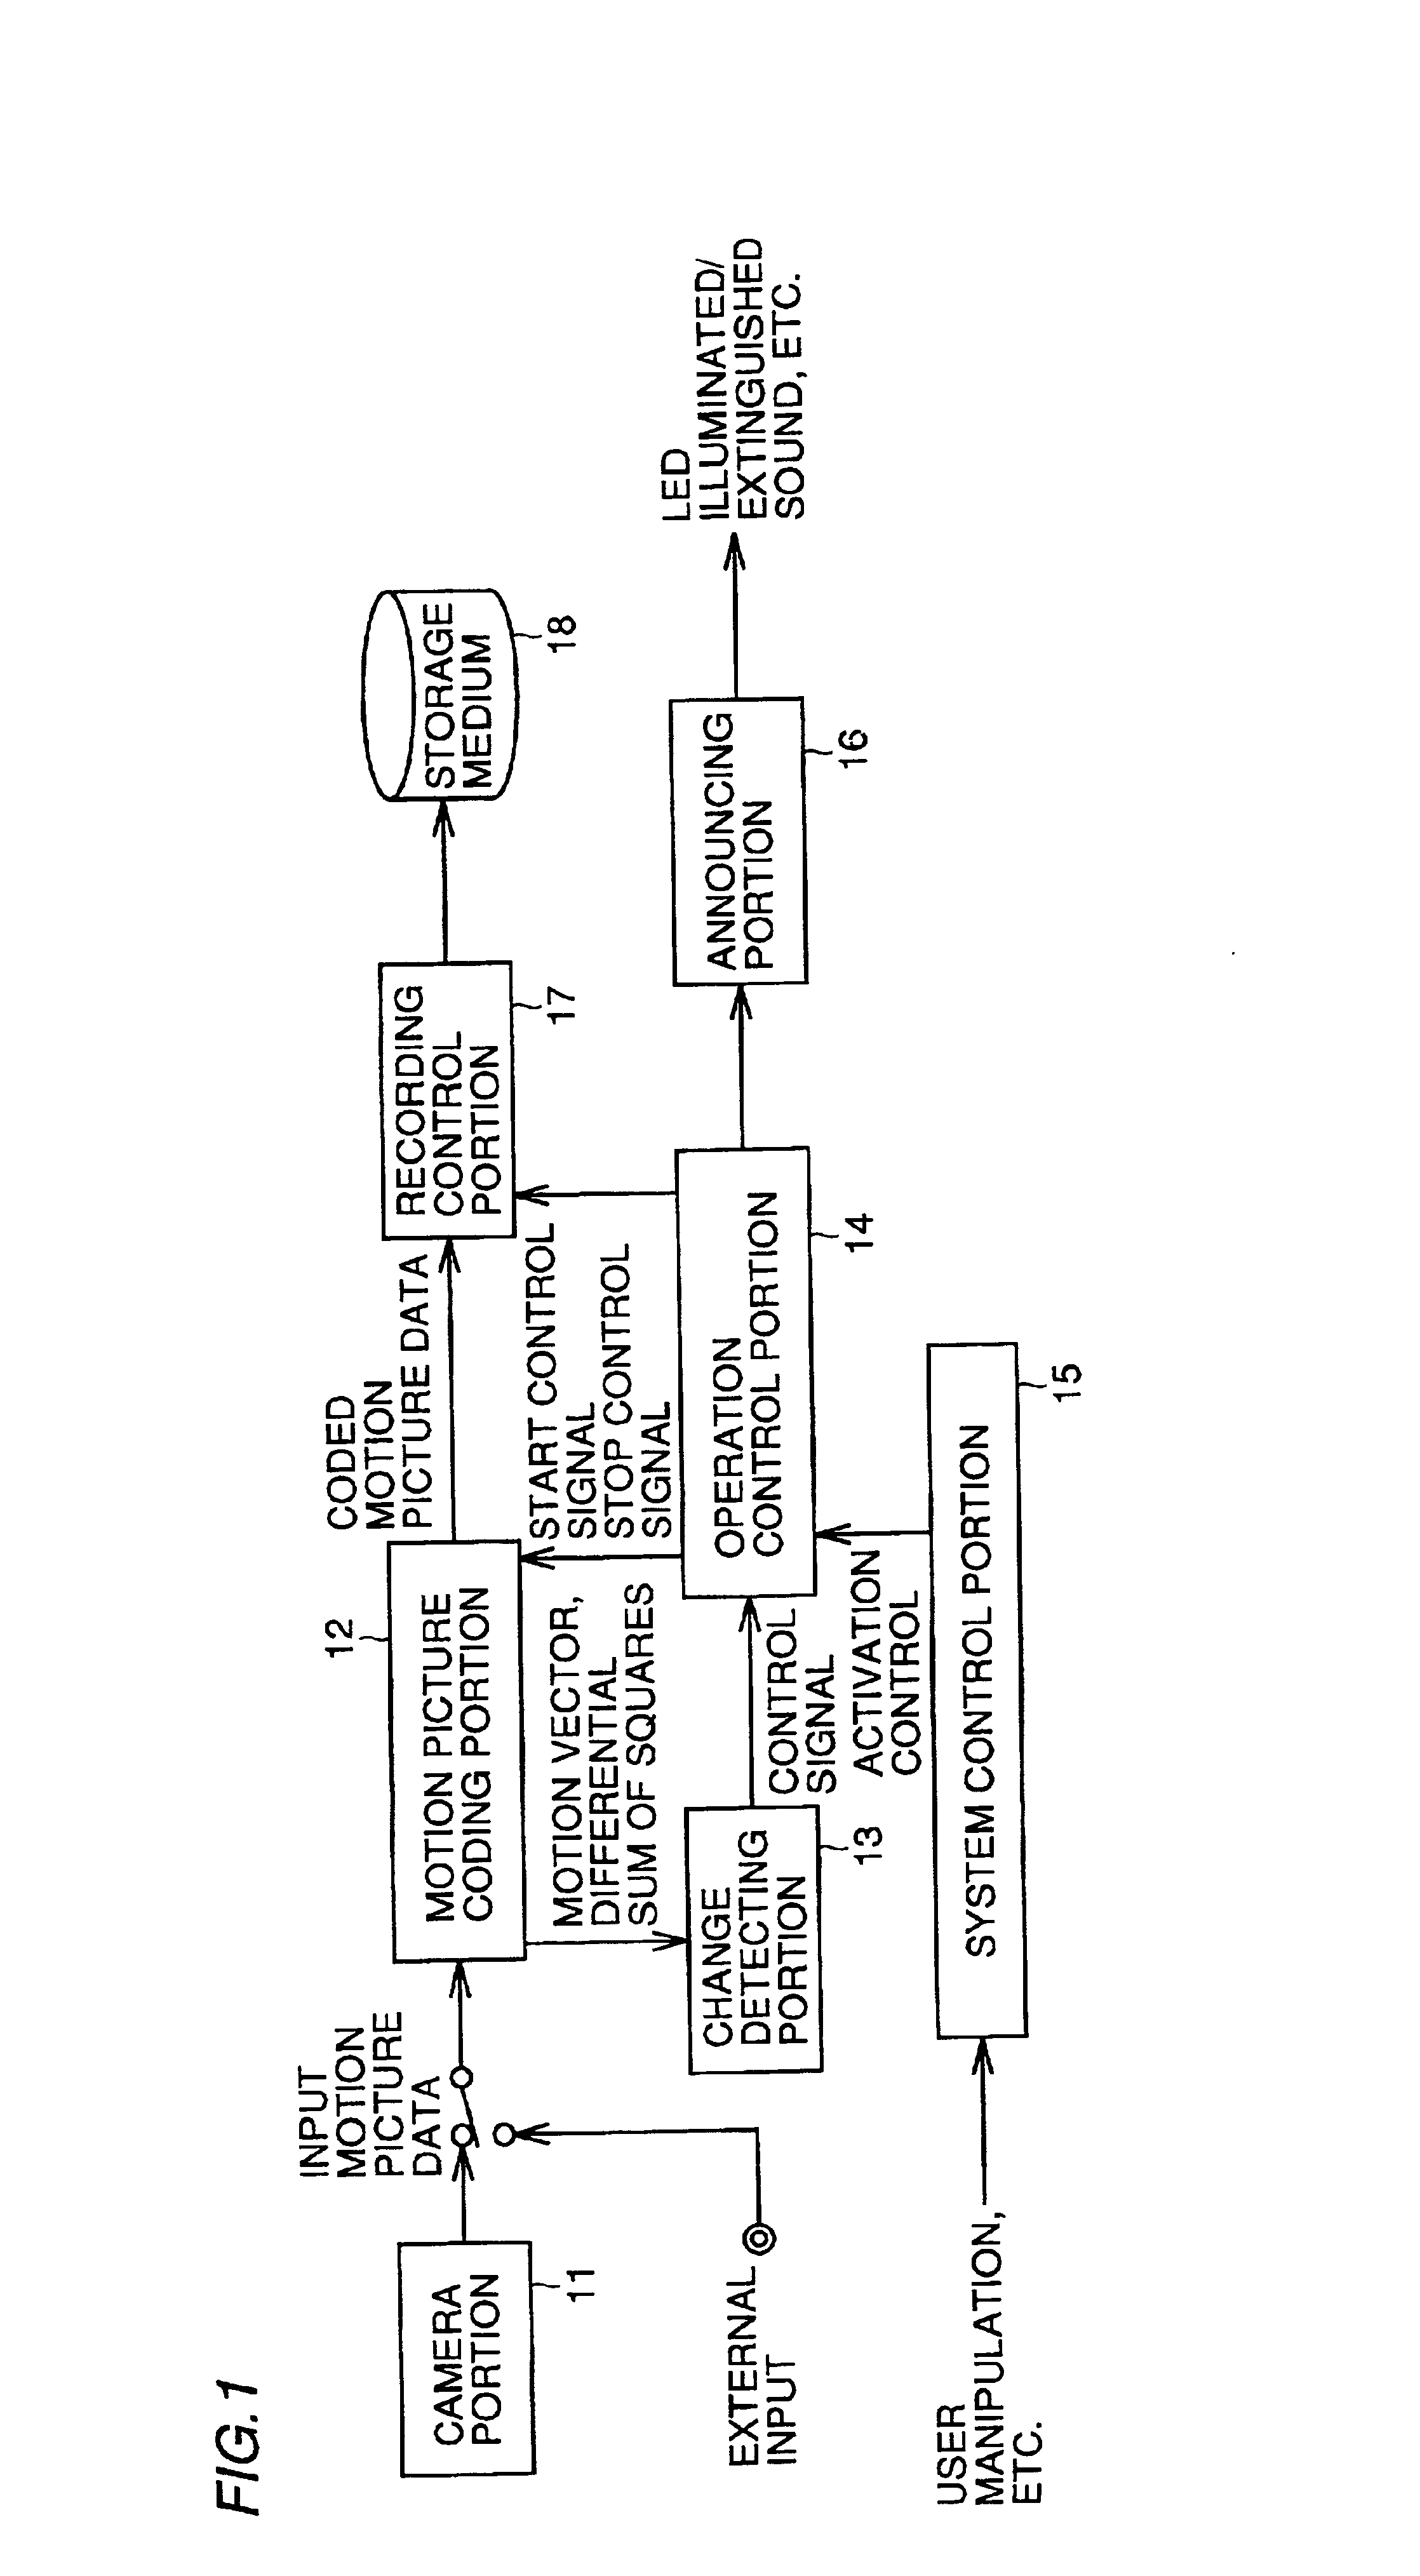 Image processing apparatus with automatic image pickup feature